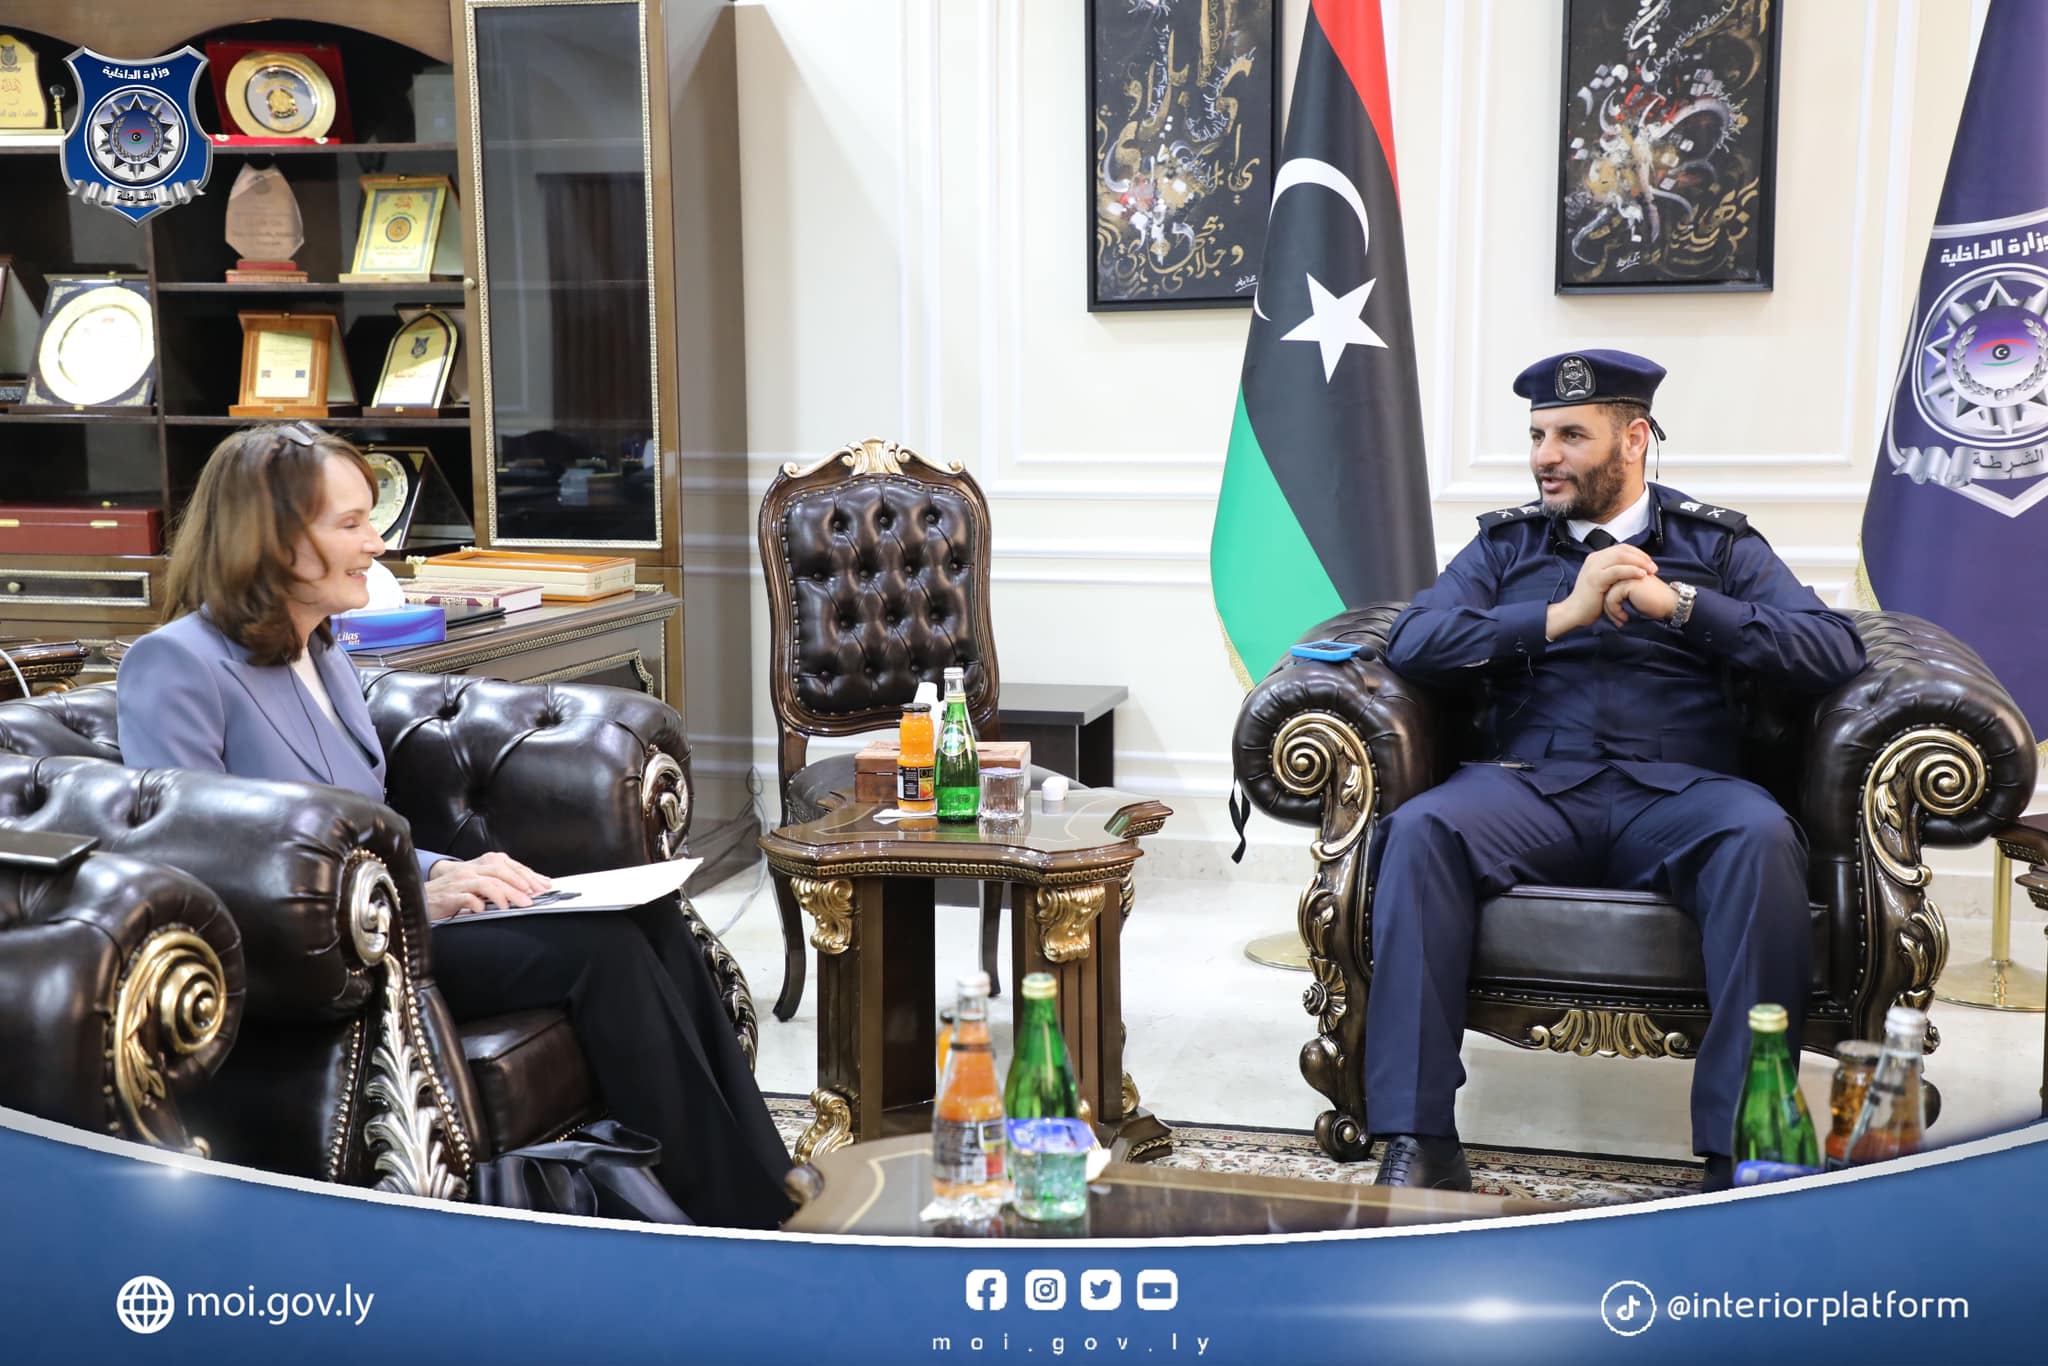 The Acting Minister of Interior receives the Deputy Special Representative of the Secretary-General of the United Nations in Libya.